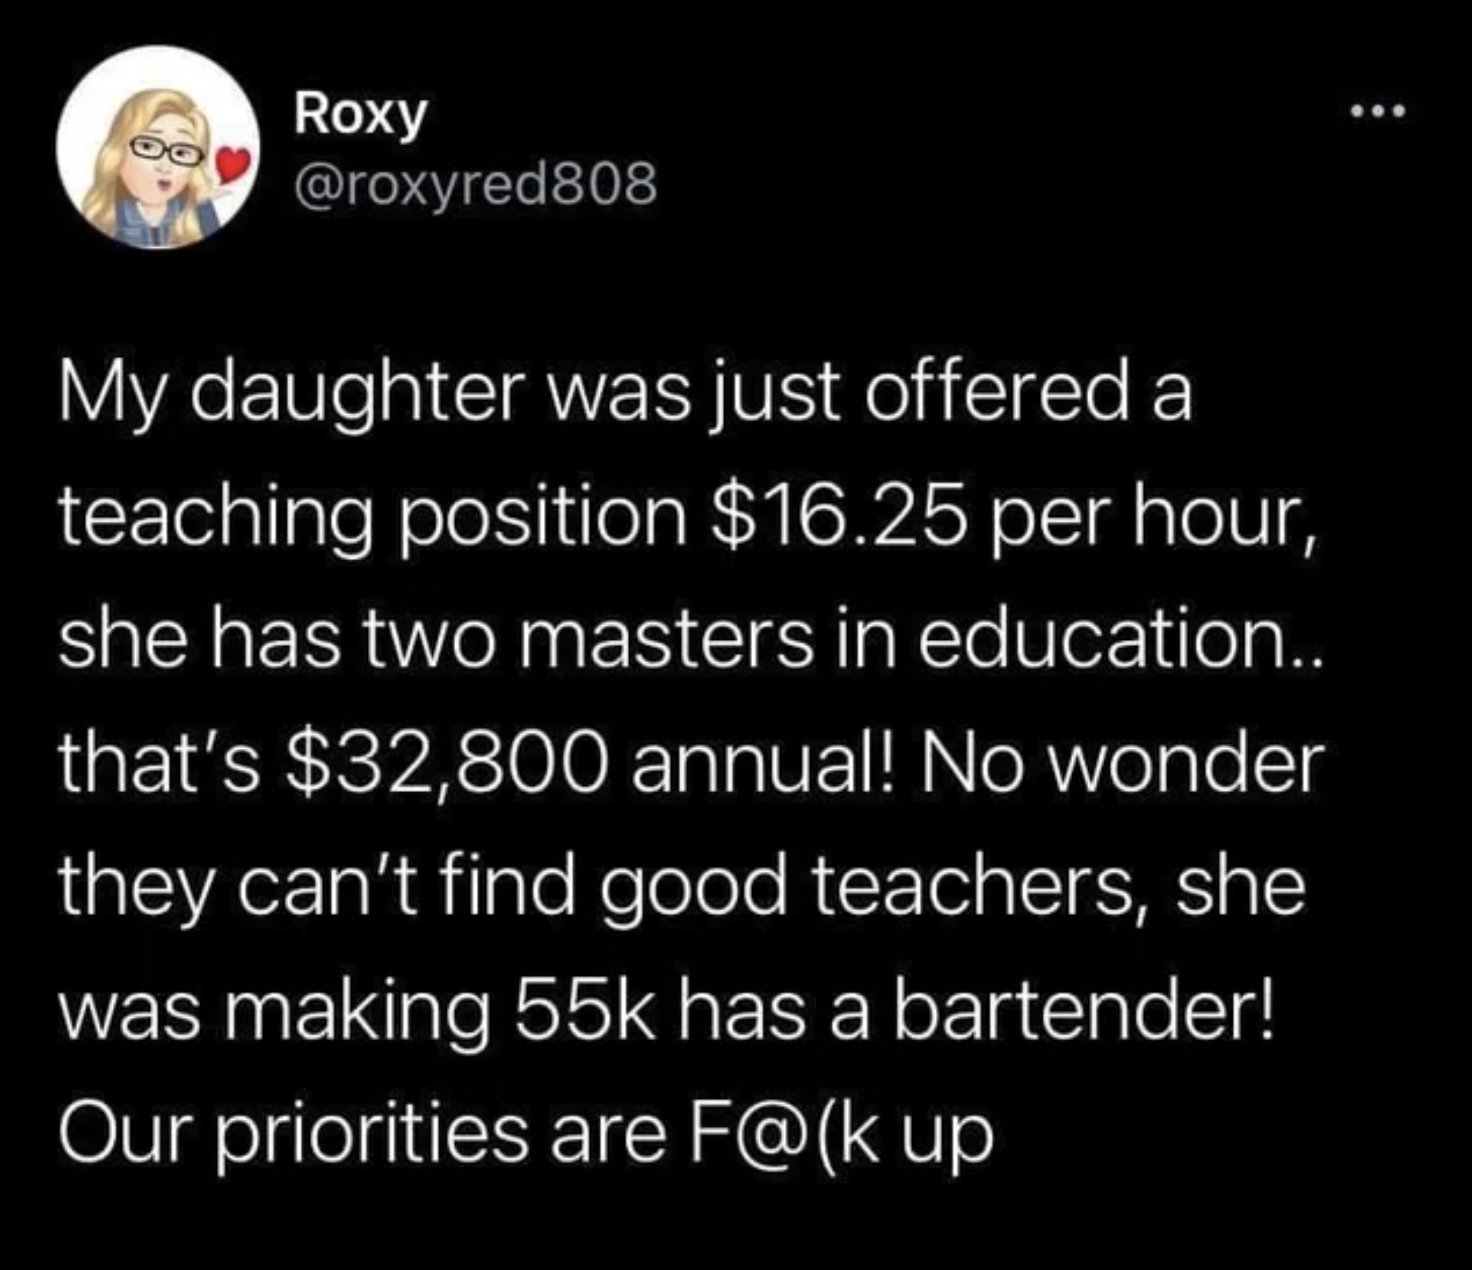 facepalms - there's not a teacher shortage - Roxy My daughter was just offered a teaching position $16.25 per hour, she has two masters in education.. that's $32,800 annual! No wonder they can't find good teachers, she was making 55k has a bartender! Our